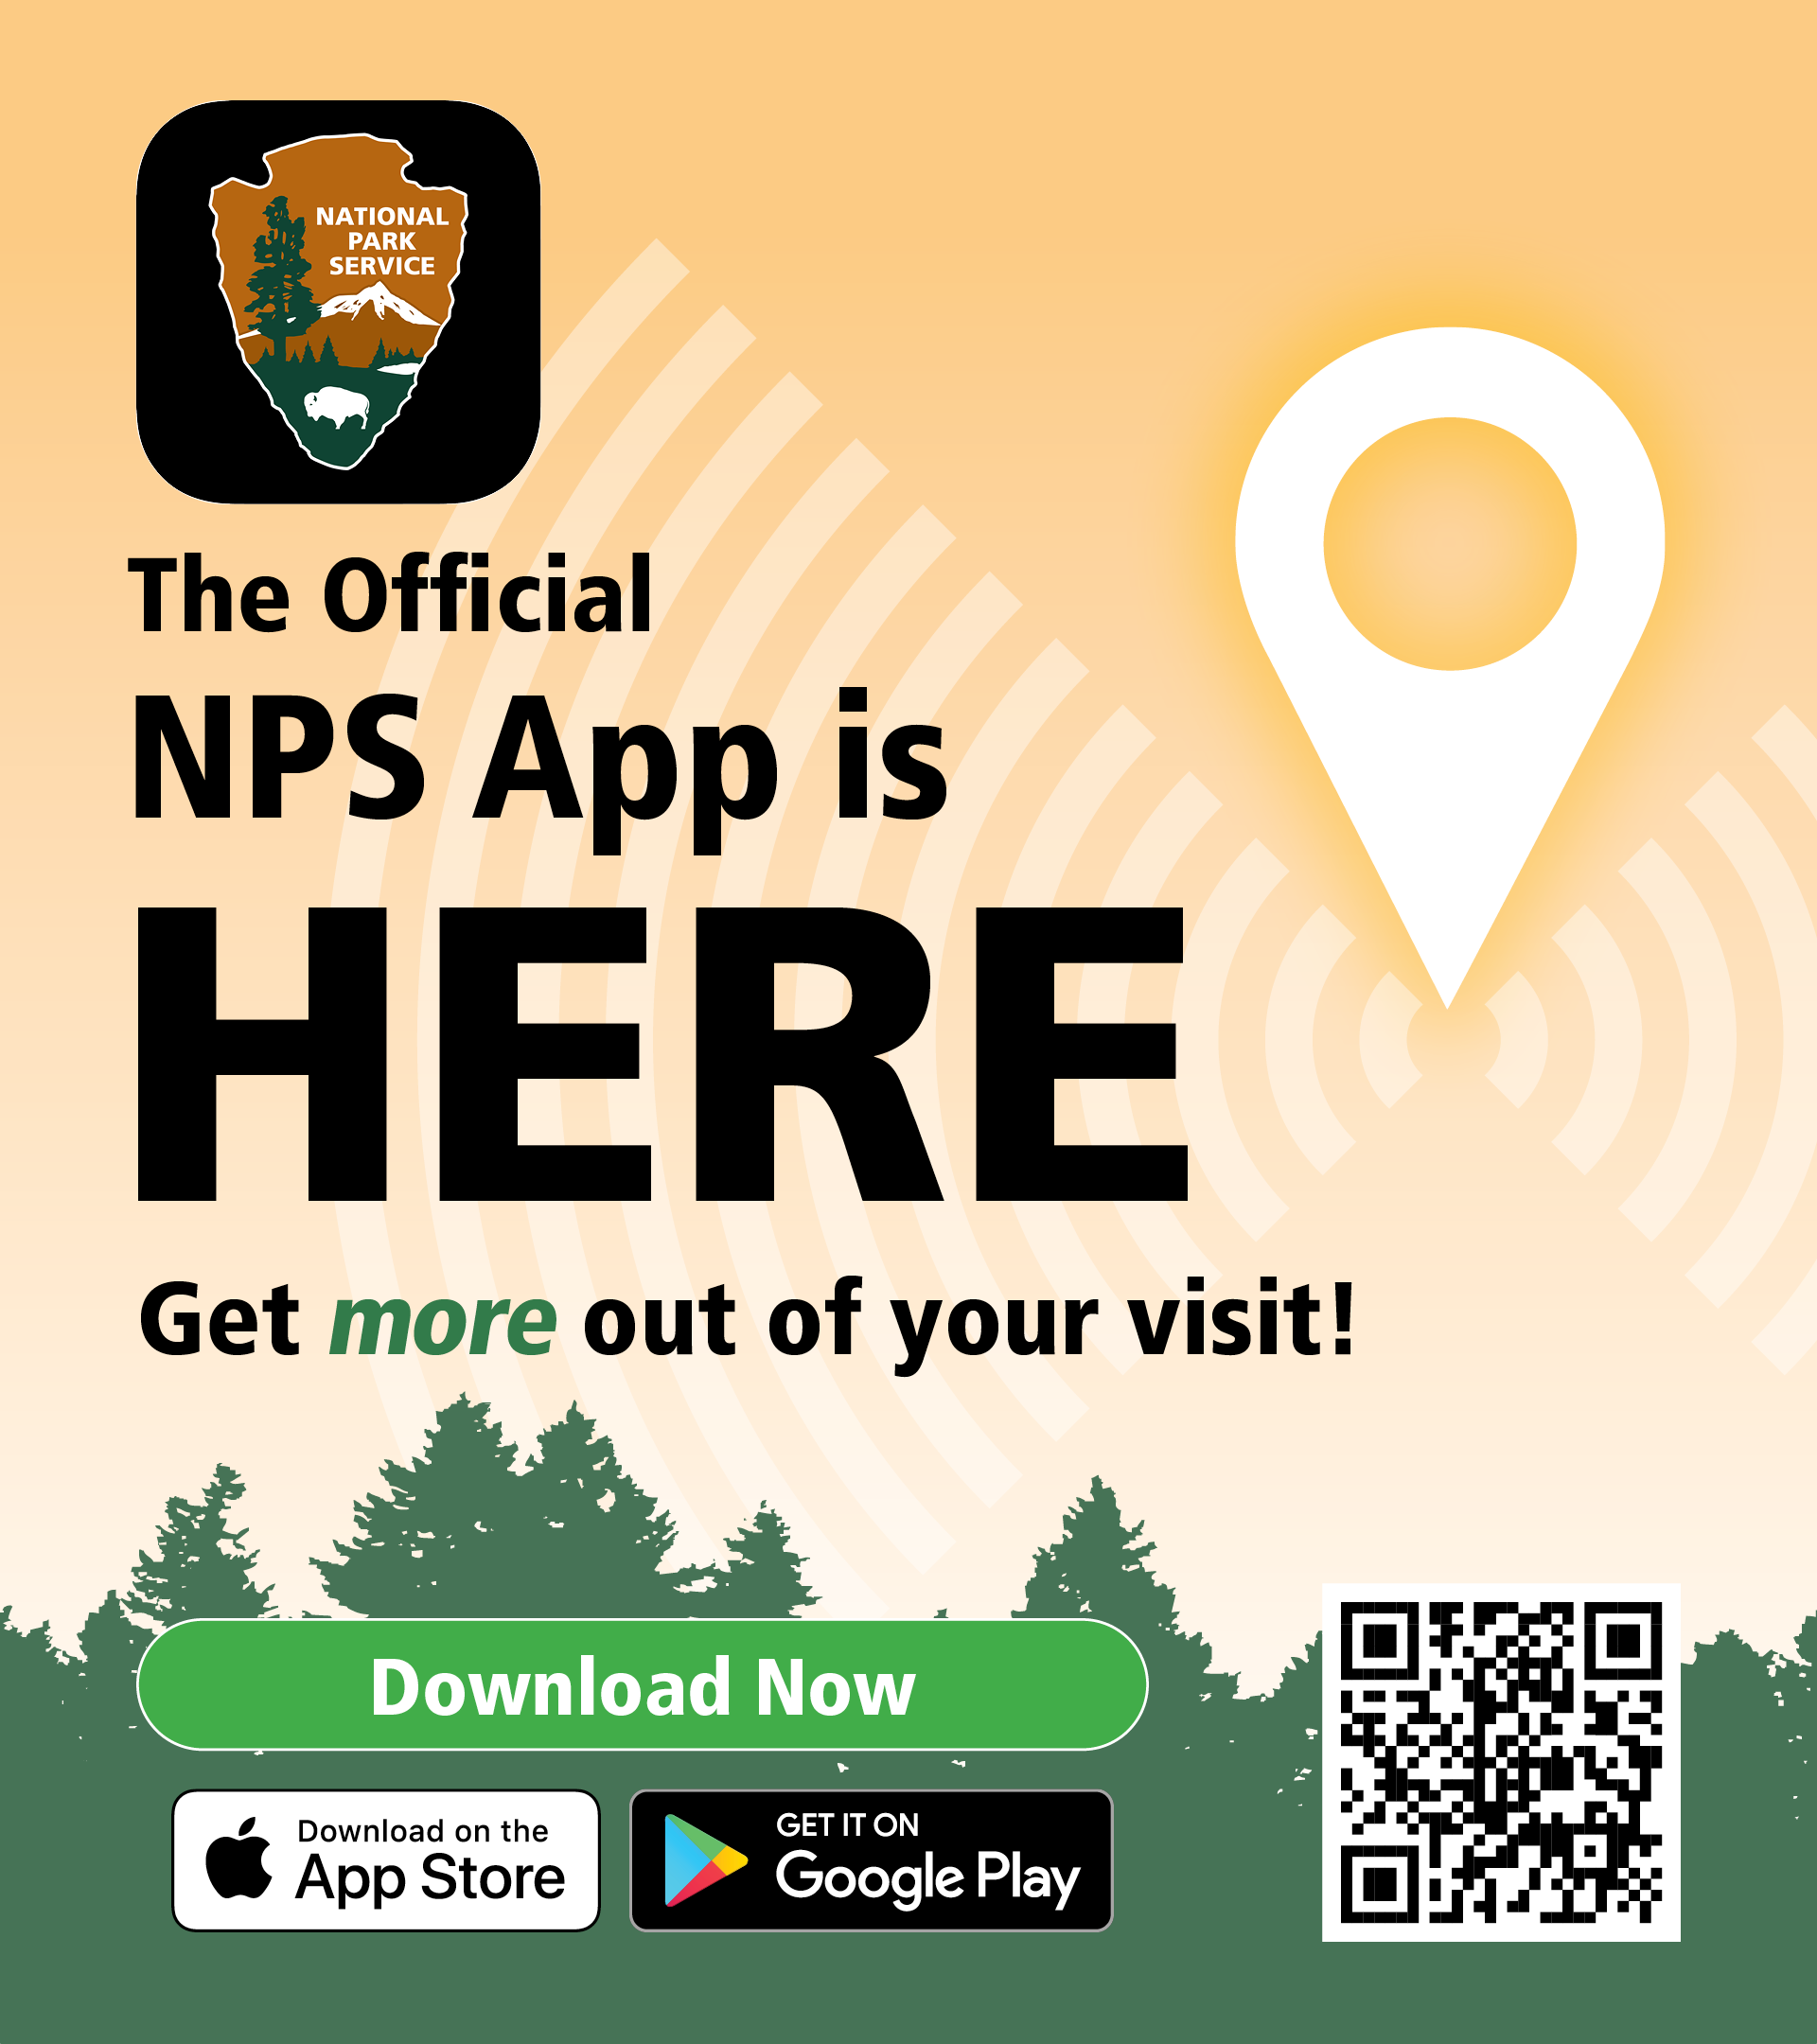 An image with the wording "The official NPS App is here!"